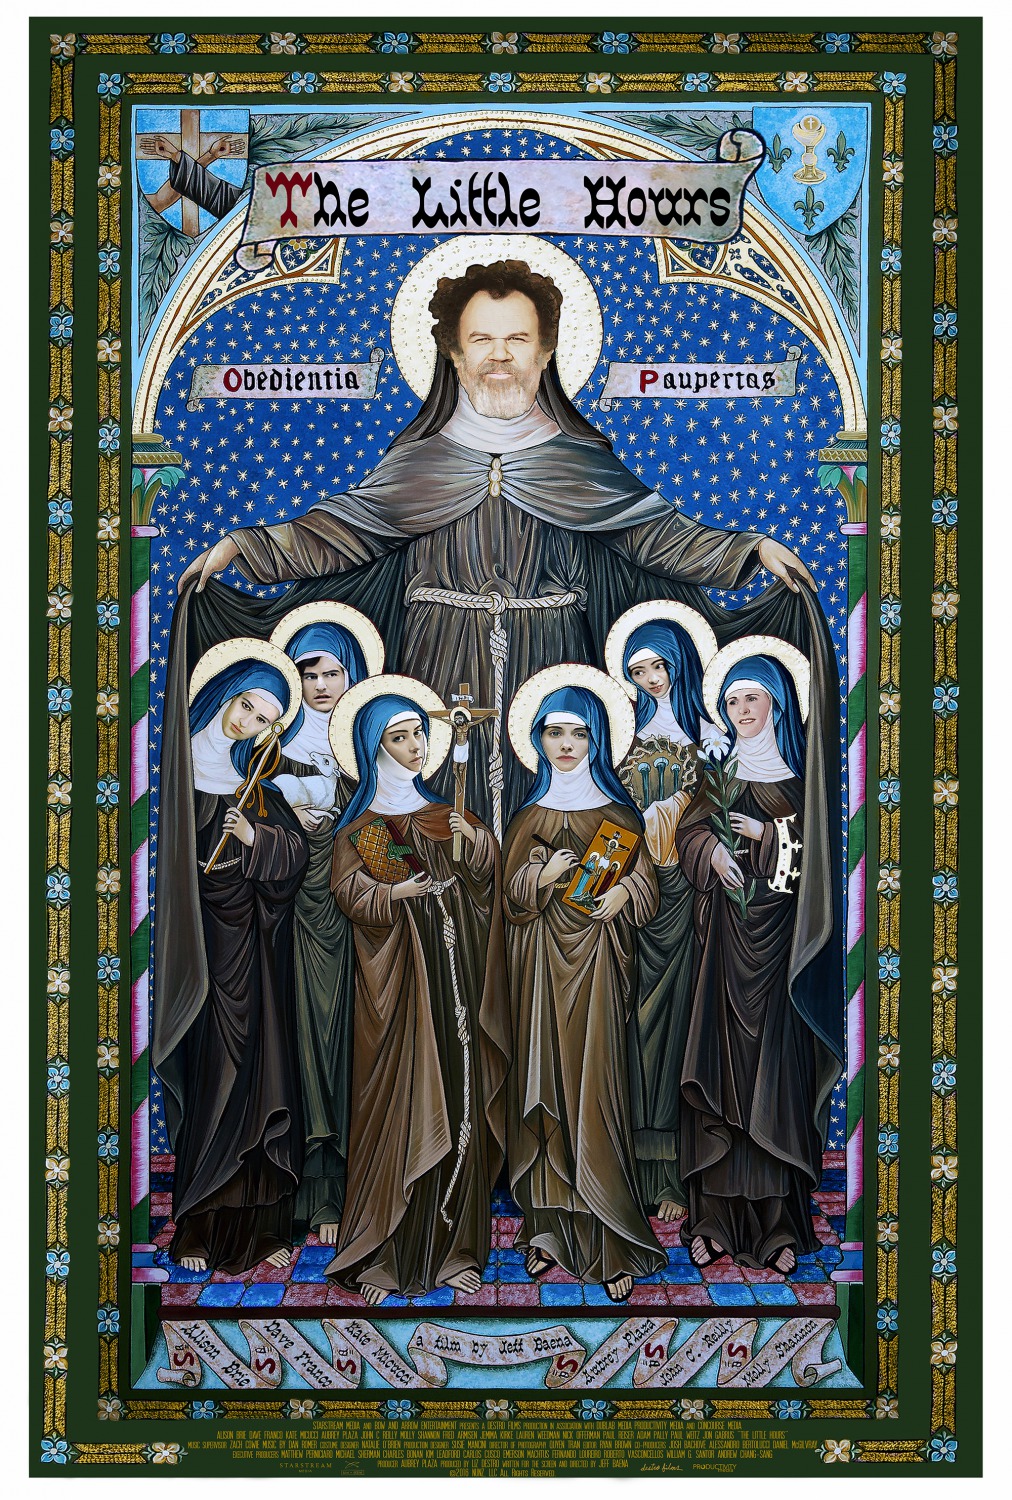 THE LITTLE HOURS Trailers, Clips, Images and Posters The